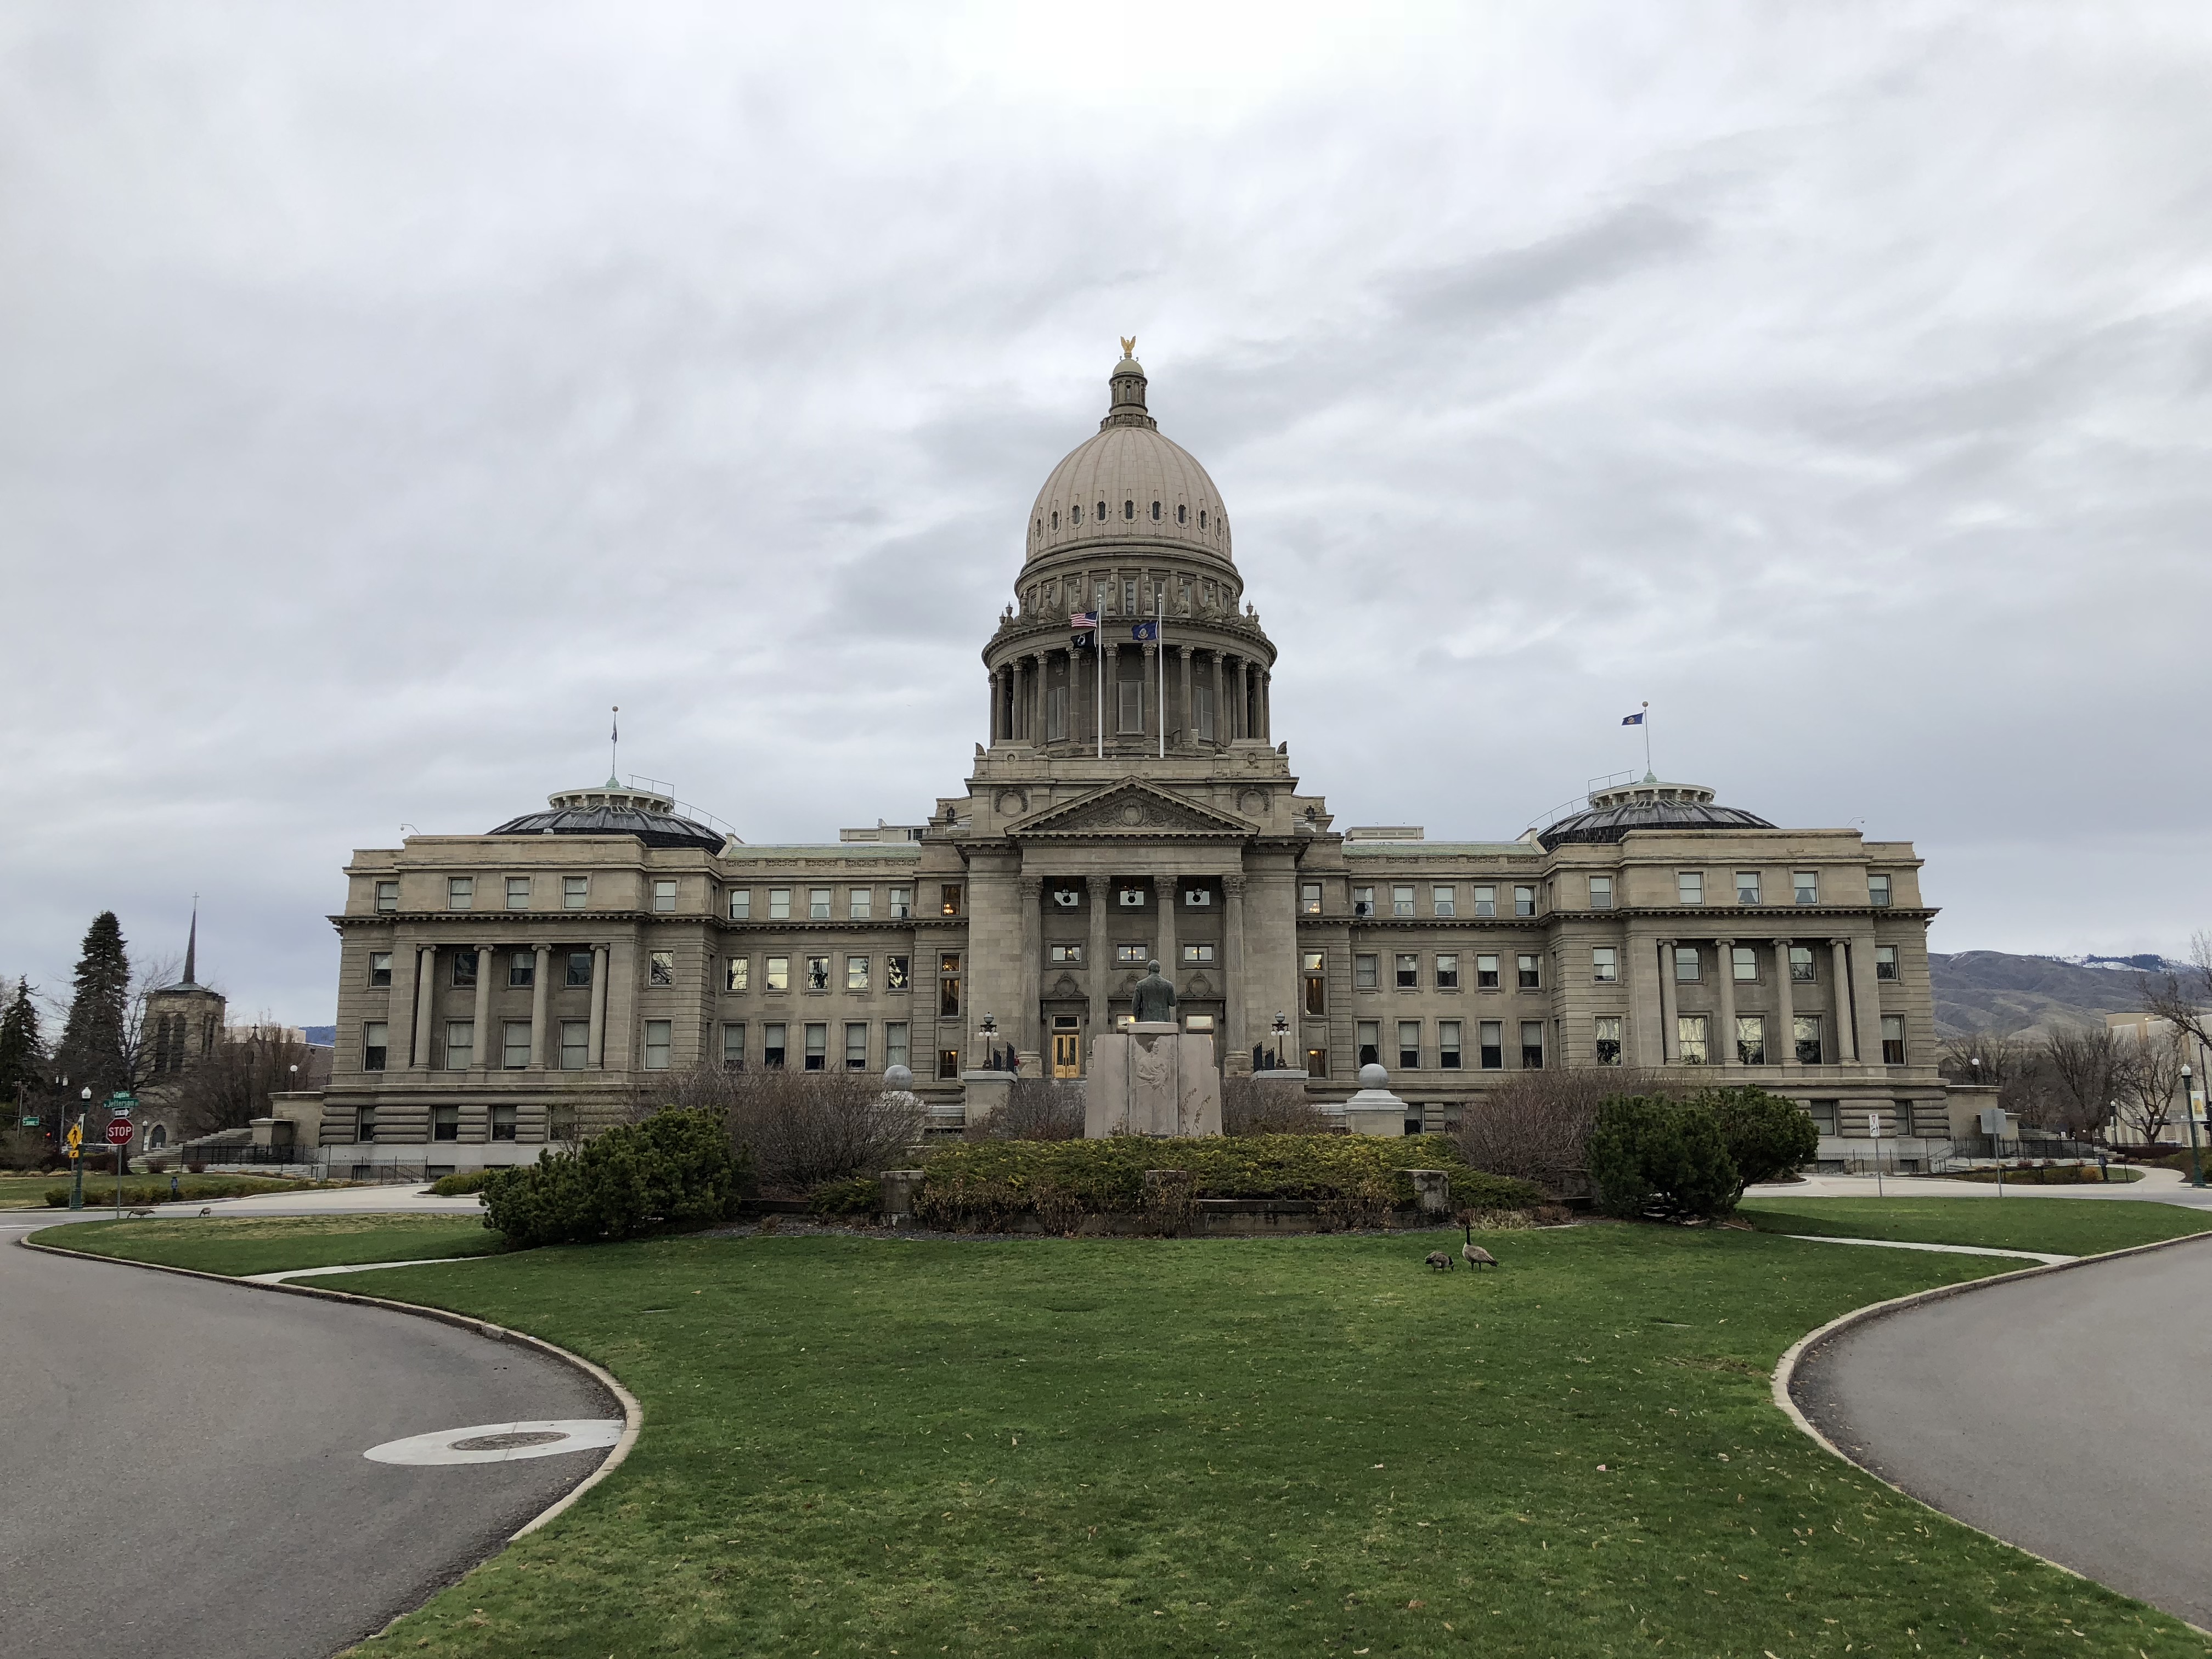 The Idaho State Capitol Building in Boise.